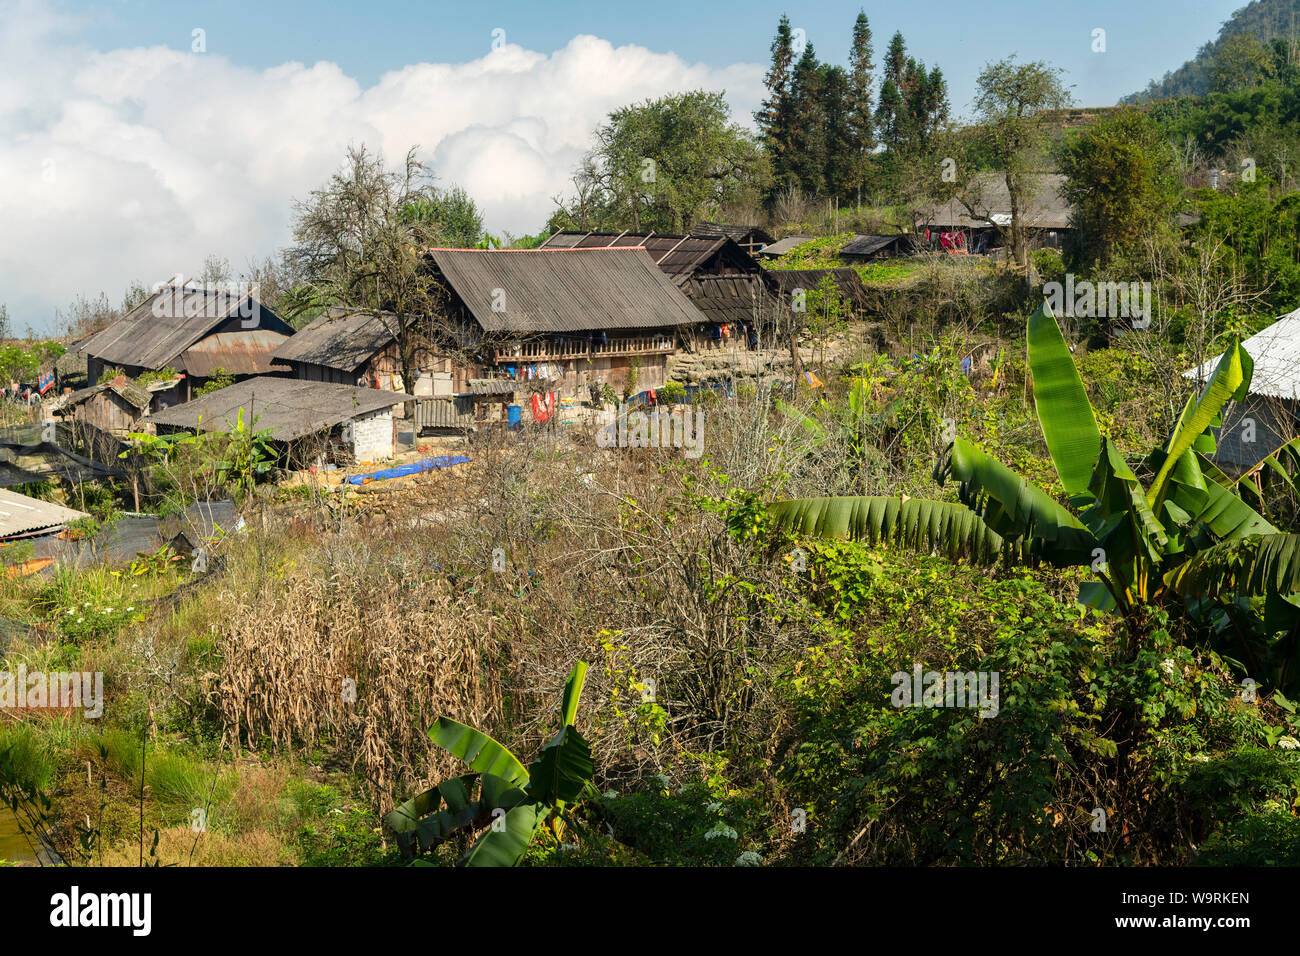 Asia, Asien, Southeast Asia, Vietnam, Northern, Hoang Lien Son Mountains, Sa Pa, Hill tribe house *** Local Caption *** Stock Photo